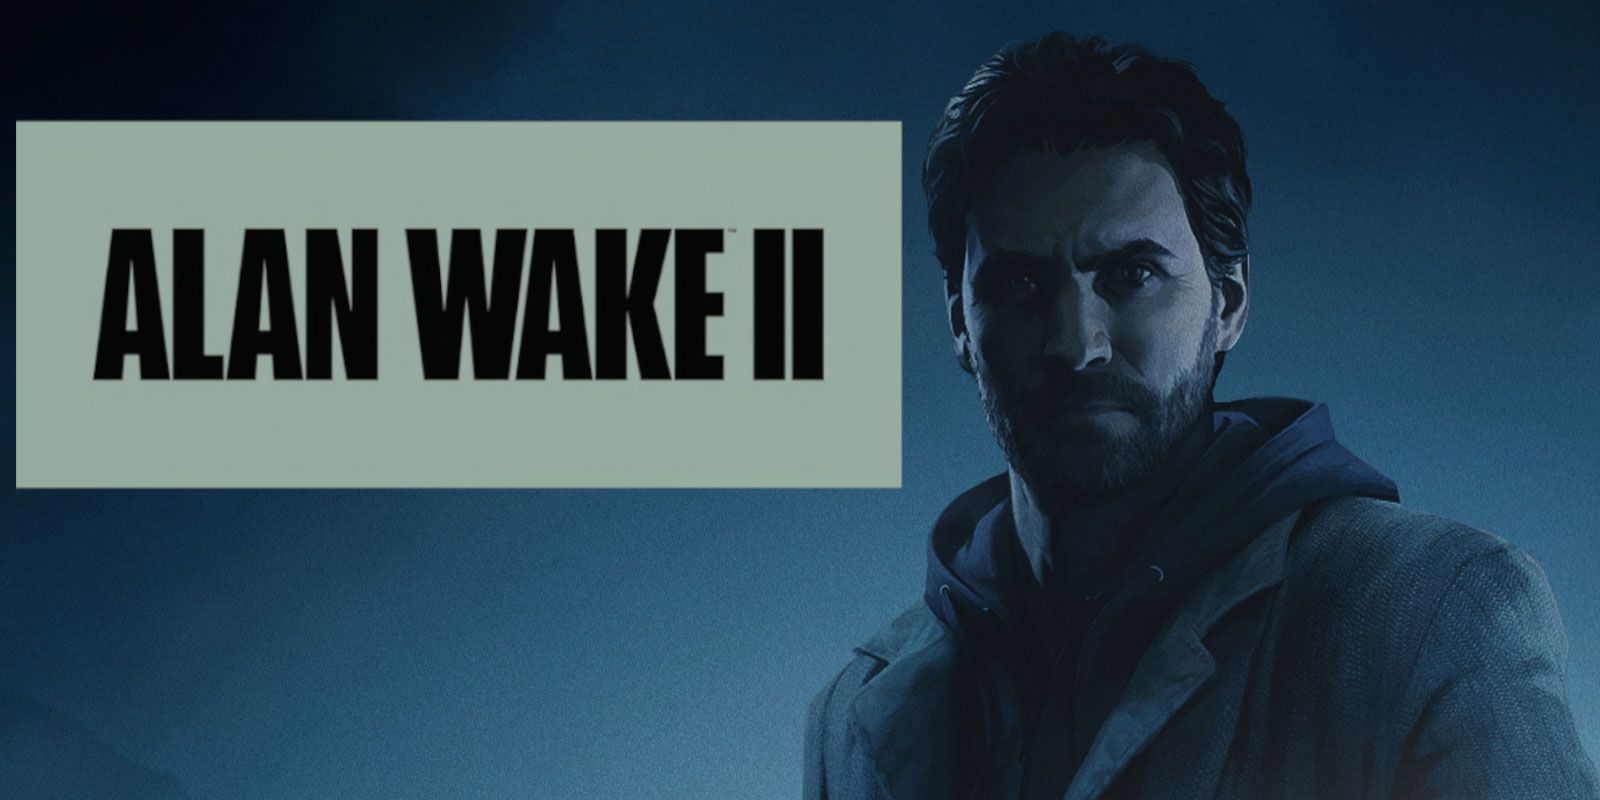 Is Alan Wake 2 available on Steam? - Xfire